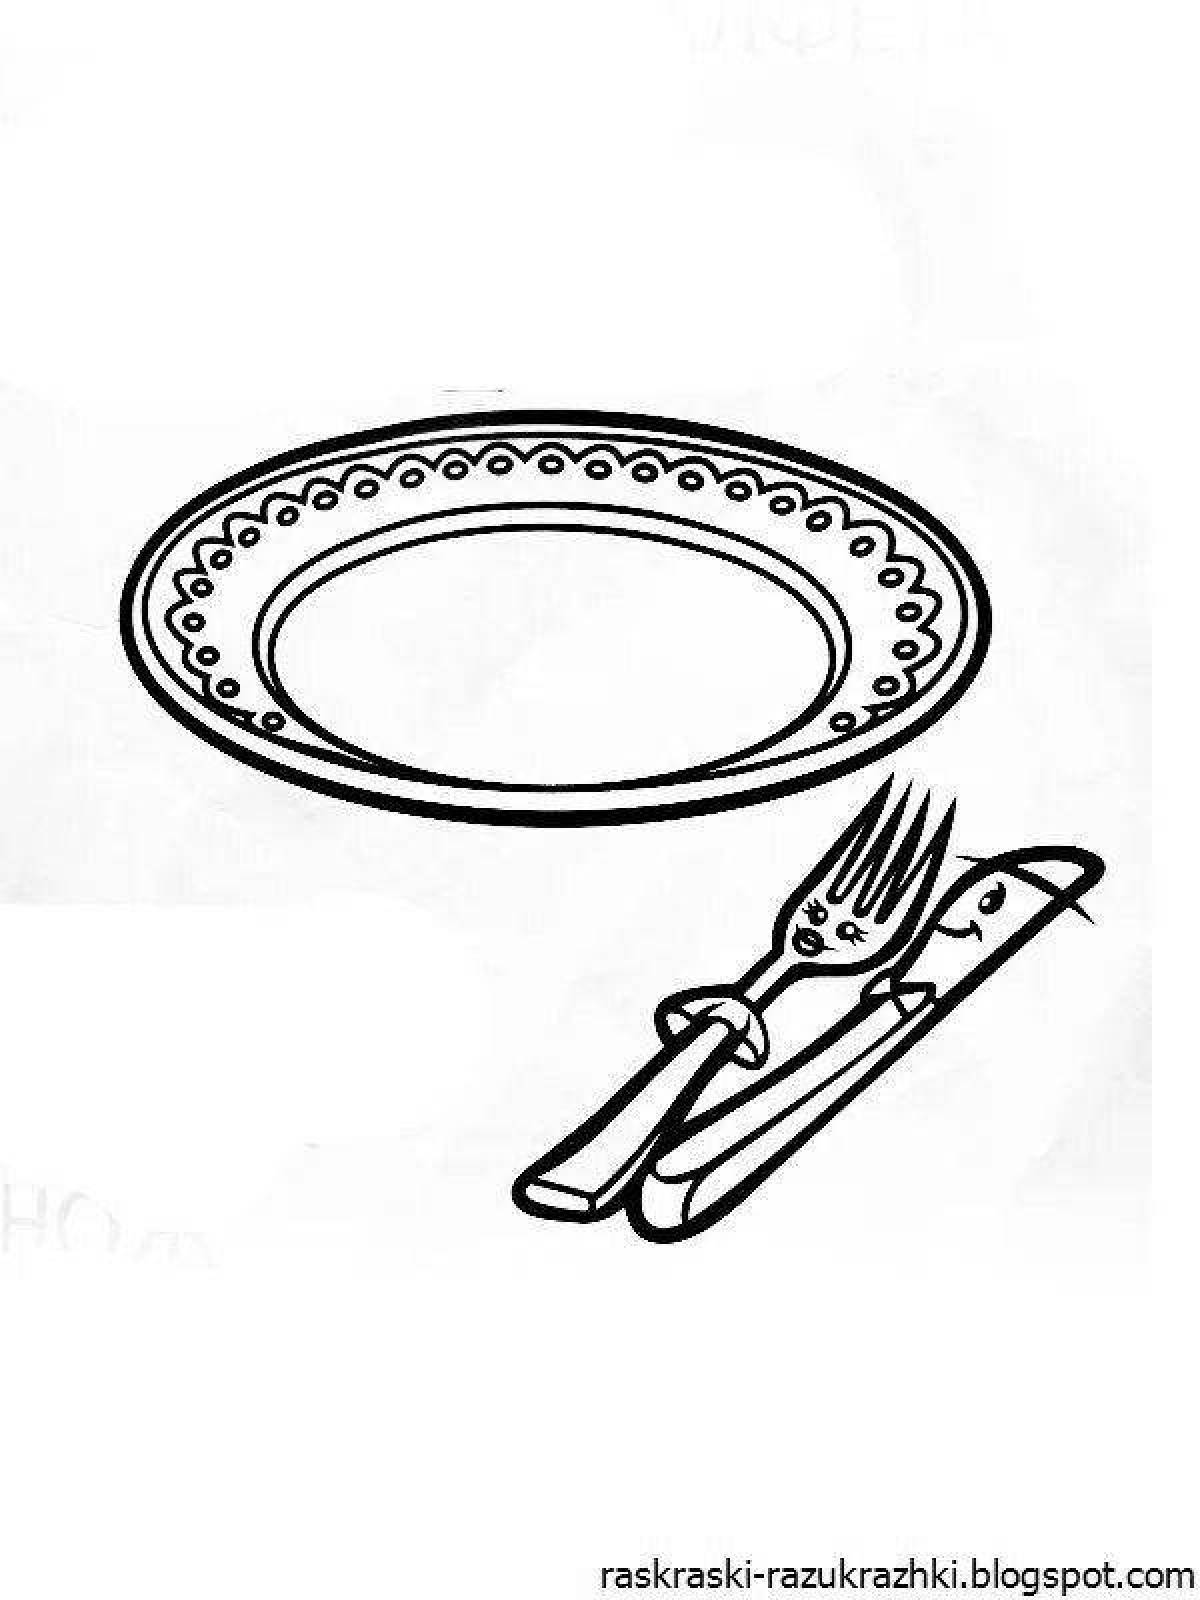 Children's plate jubilant coloring page